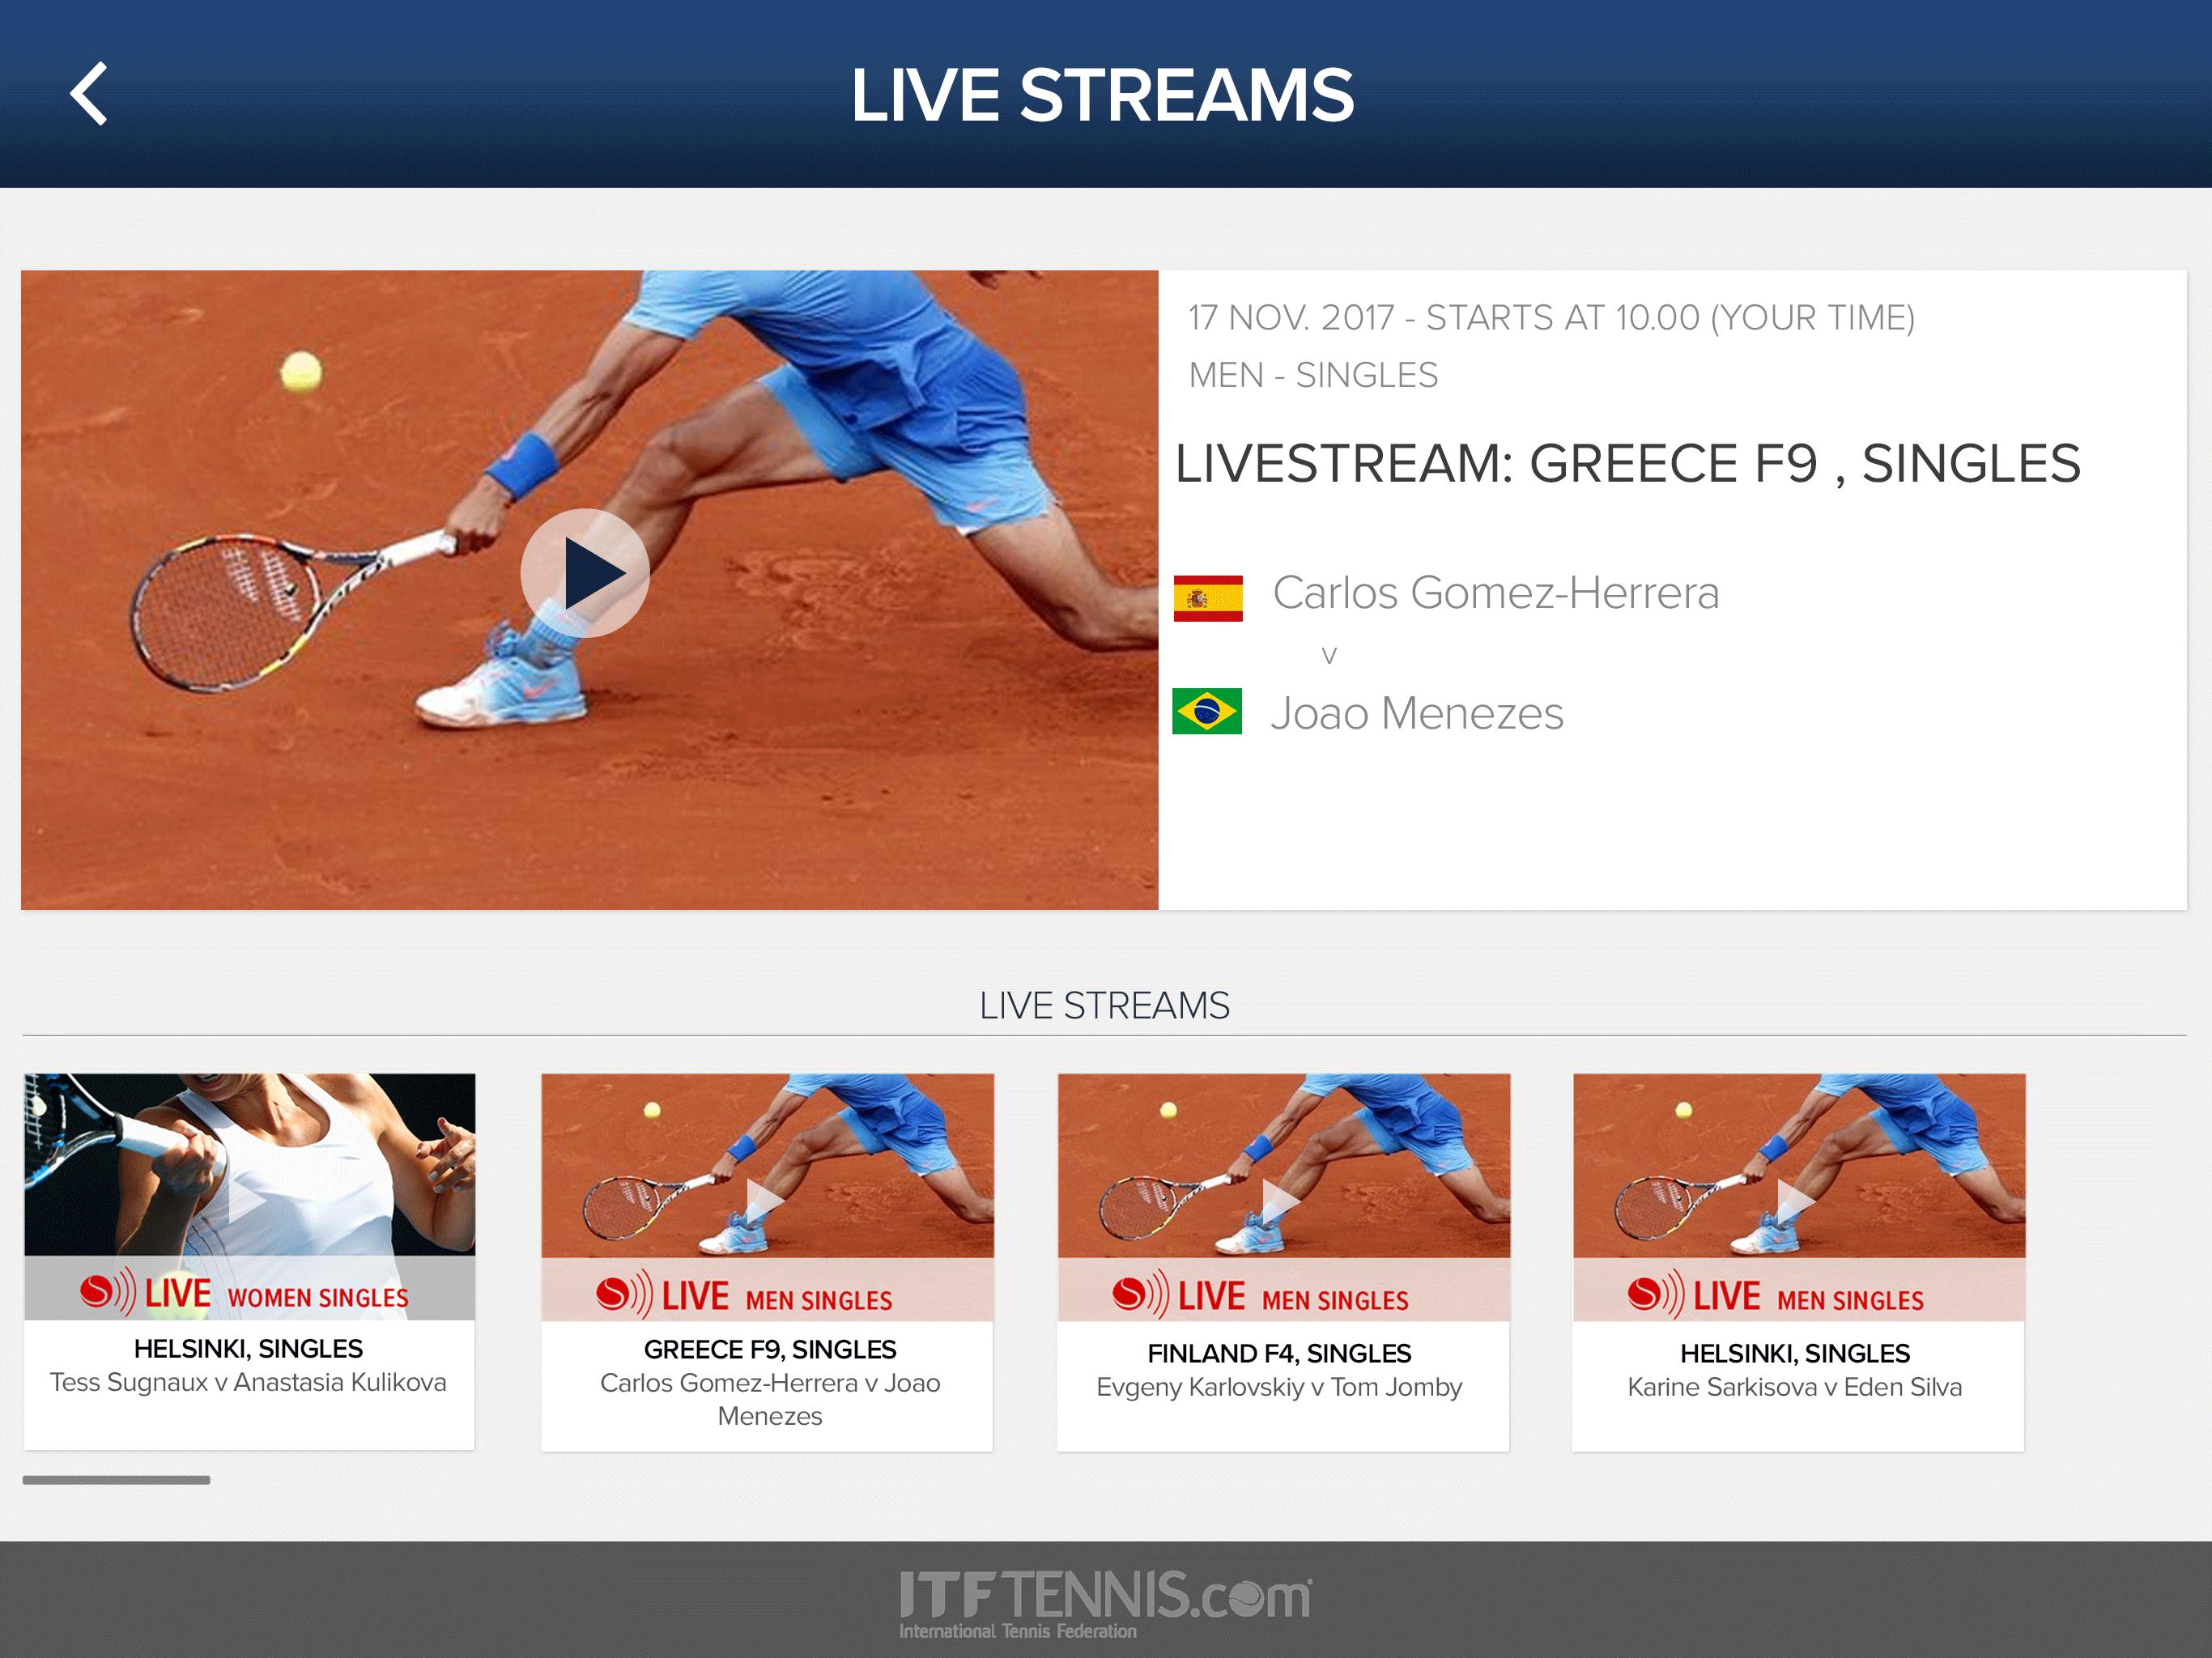 ITF Live Scores for Android - APK Download